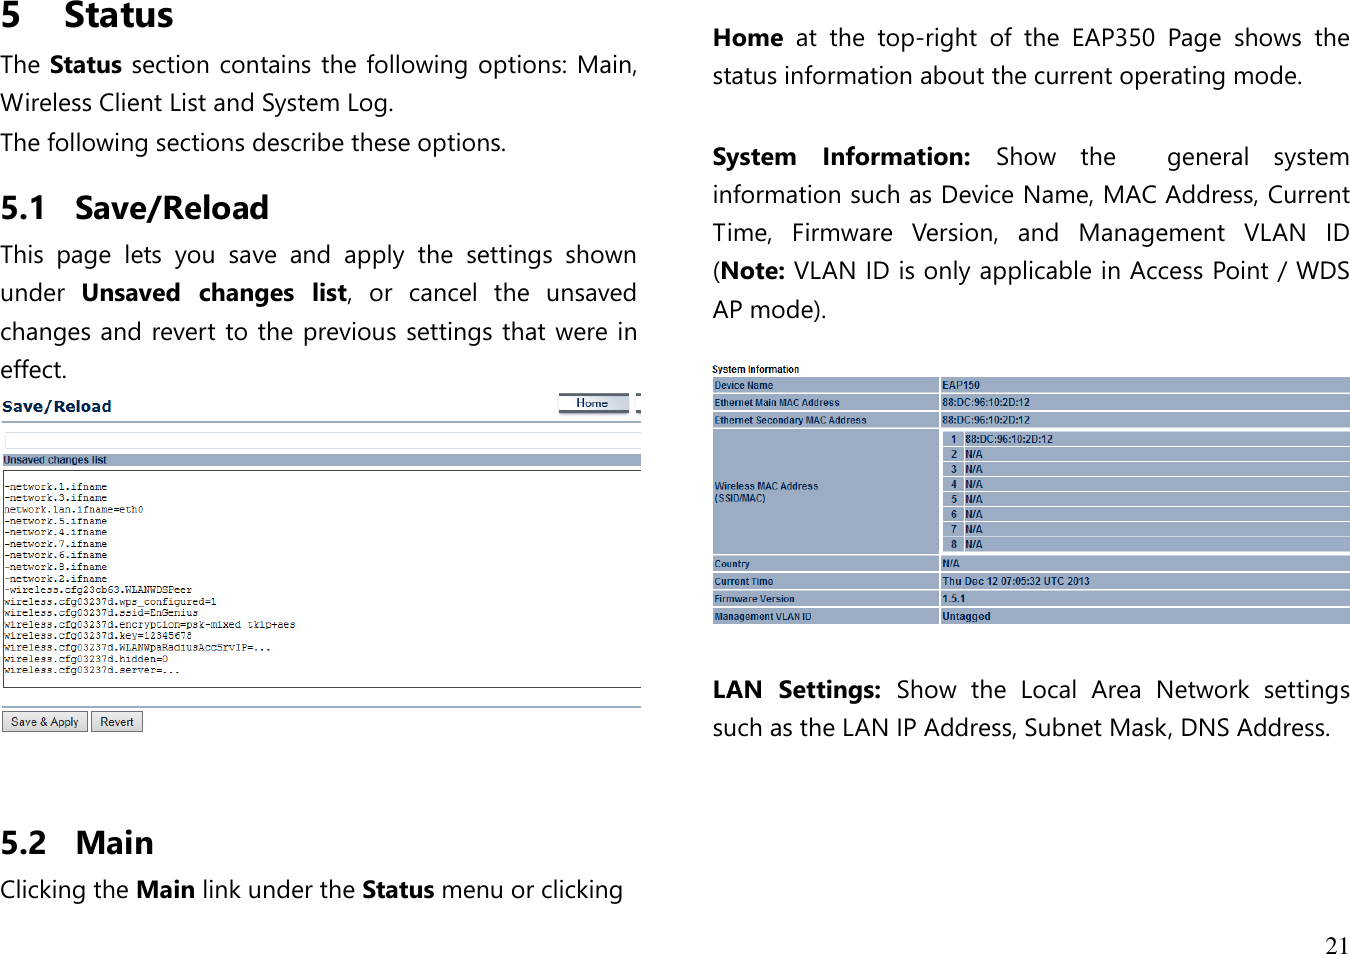  21  5   Status The Status section contains the following options: Main, Wireless Client List and System Log. The following sections describe these options. 5.1 Save/Reload This  page  lets  you  save  and  apply  the  settings  shown under  Unsaved  changes  list,  or  cancel  the  unsaved changes and revert to the previous settings that were in effect.    5.2 Main Clicking the Main link under the Status menu or clicking    Home  at  the  top-right  of  the  EAP350  Page  shows  the status information about the current operating mode.  System  Information:  Show  the  general  system information such as Device Name, MAC Address, Current Time,  Firmware  Version,  and  Management  VLAN  ID (Note: VLAN ID is only applicable in Access Point / WDS AP mode).     LAN  Settings:  Show  the  Local  Area  Network  settings such as the LAN IP Address, Subnet Mask, DNS Address.  